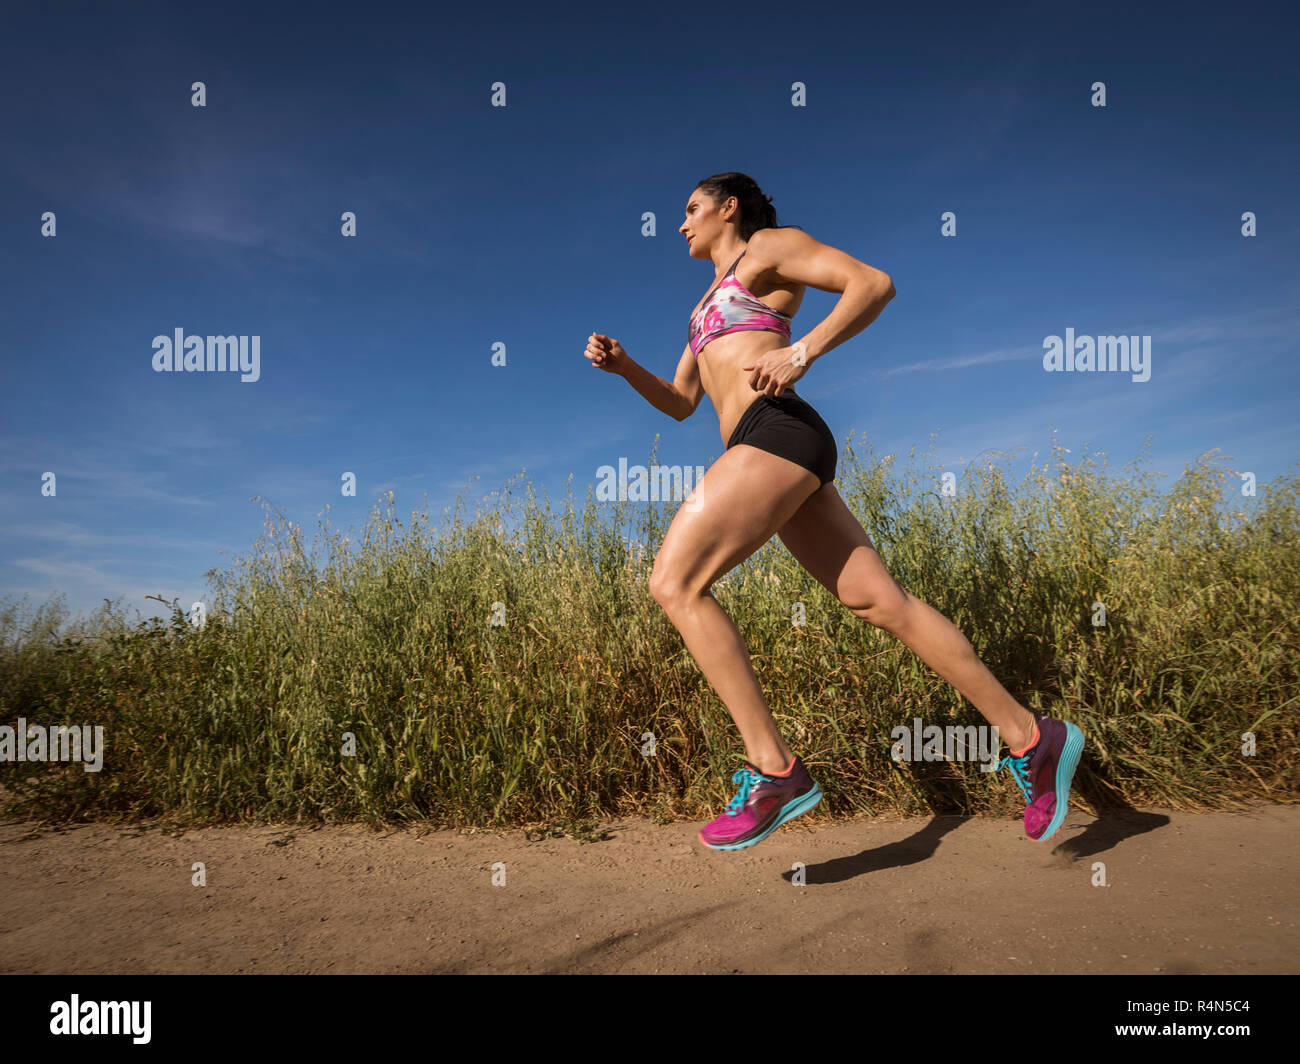 Mid adult woman jogging on path through field Stock Photo